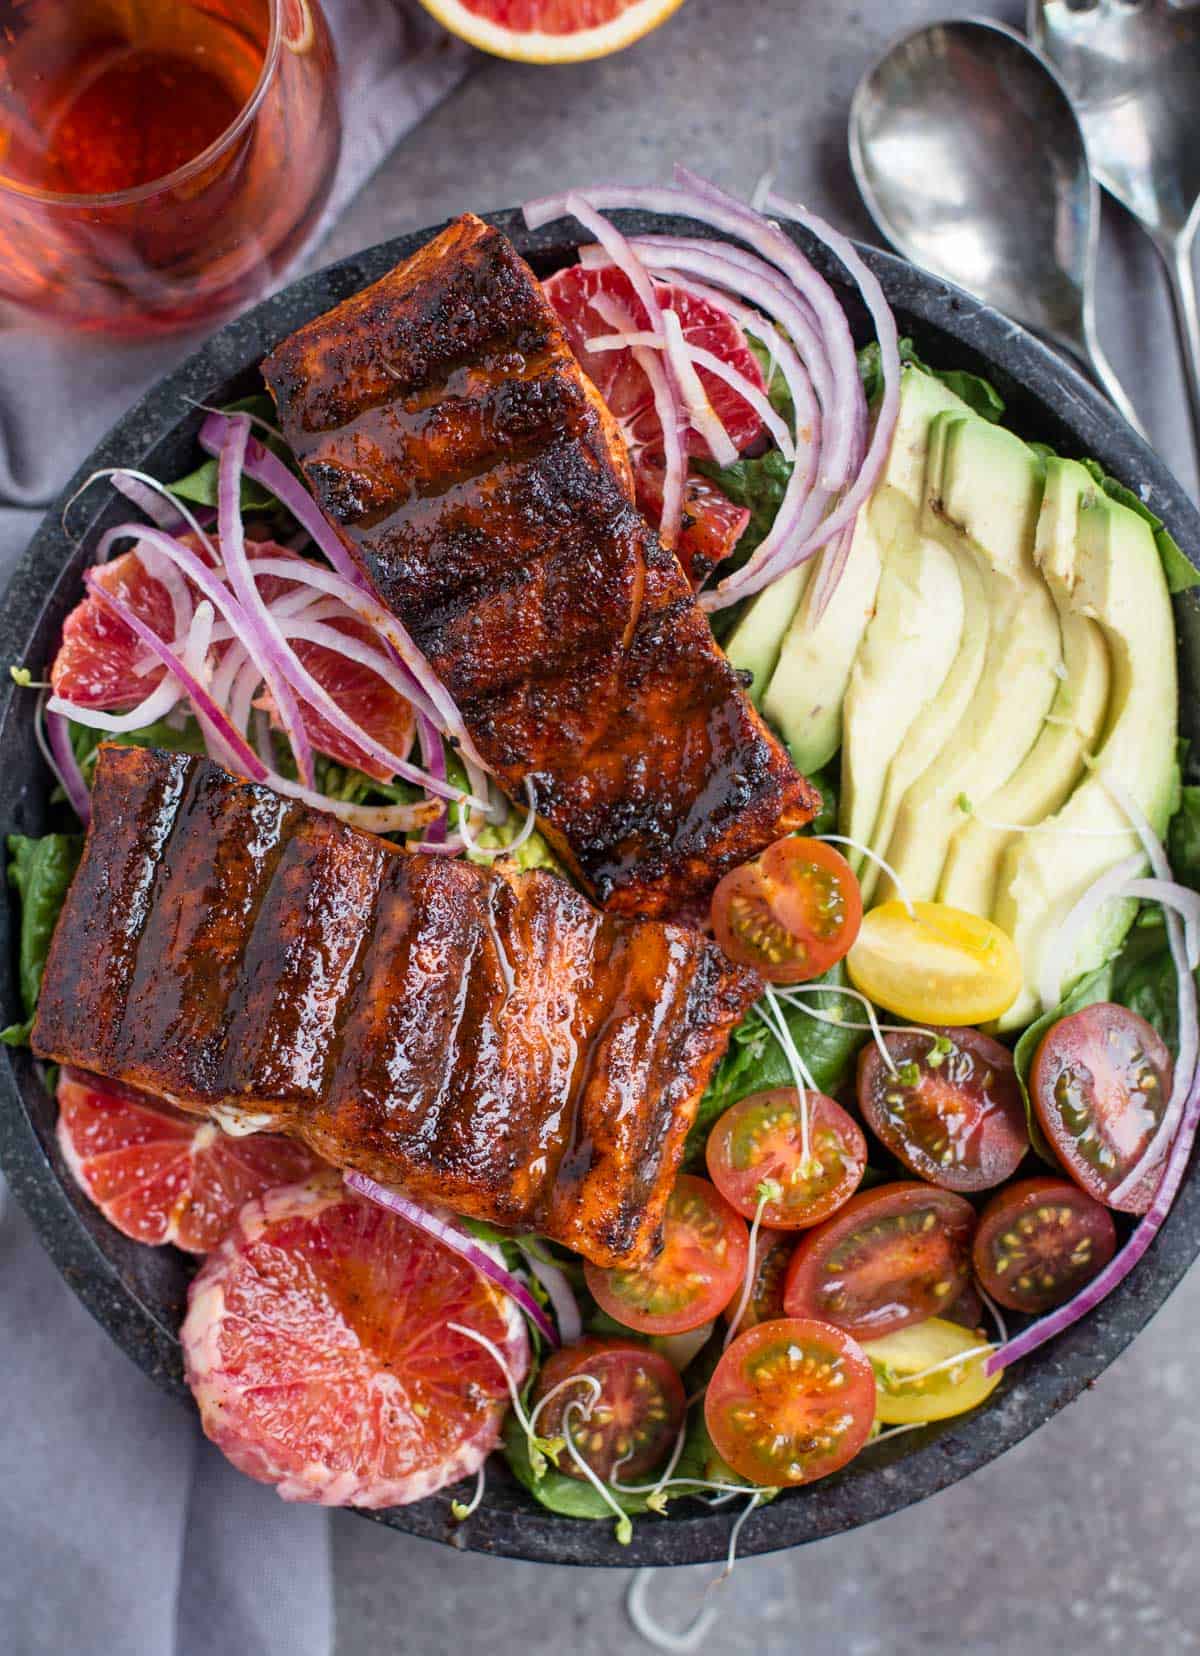 Grilled Salmon salad in a bowl with a glass of rose wine